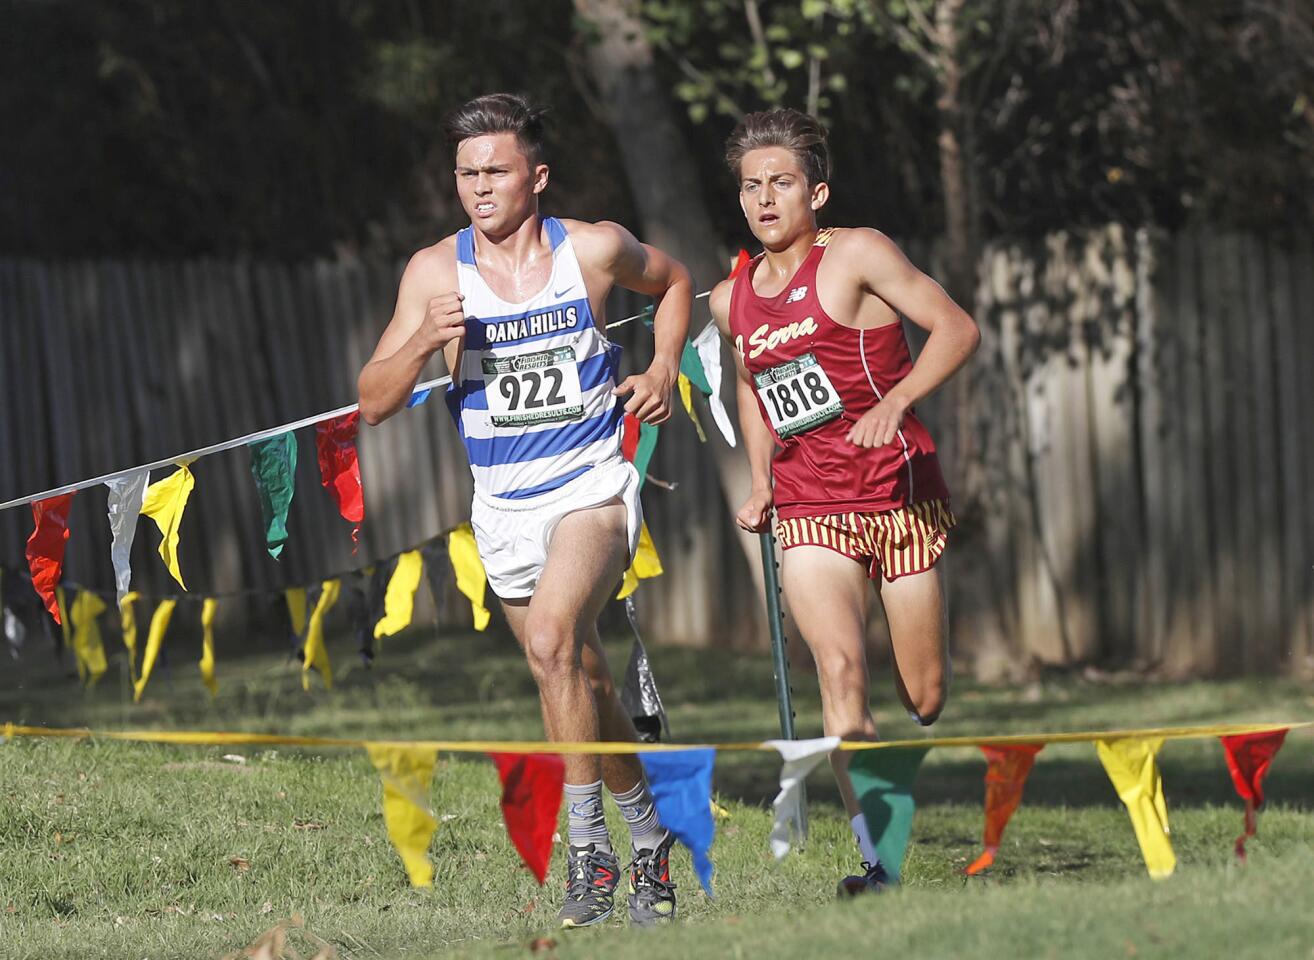 Dana Hills Jack Landgraf, left, and J Serra's Anthony Grover race along in the Boys Sweepstakes race in the Orange County Cross Country Championships at Oak Canyon Park on Saturday.